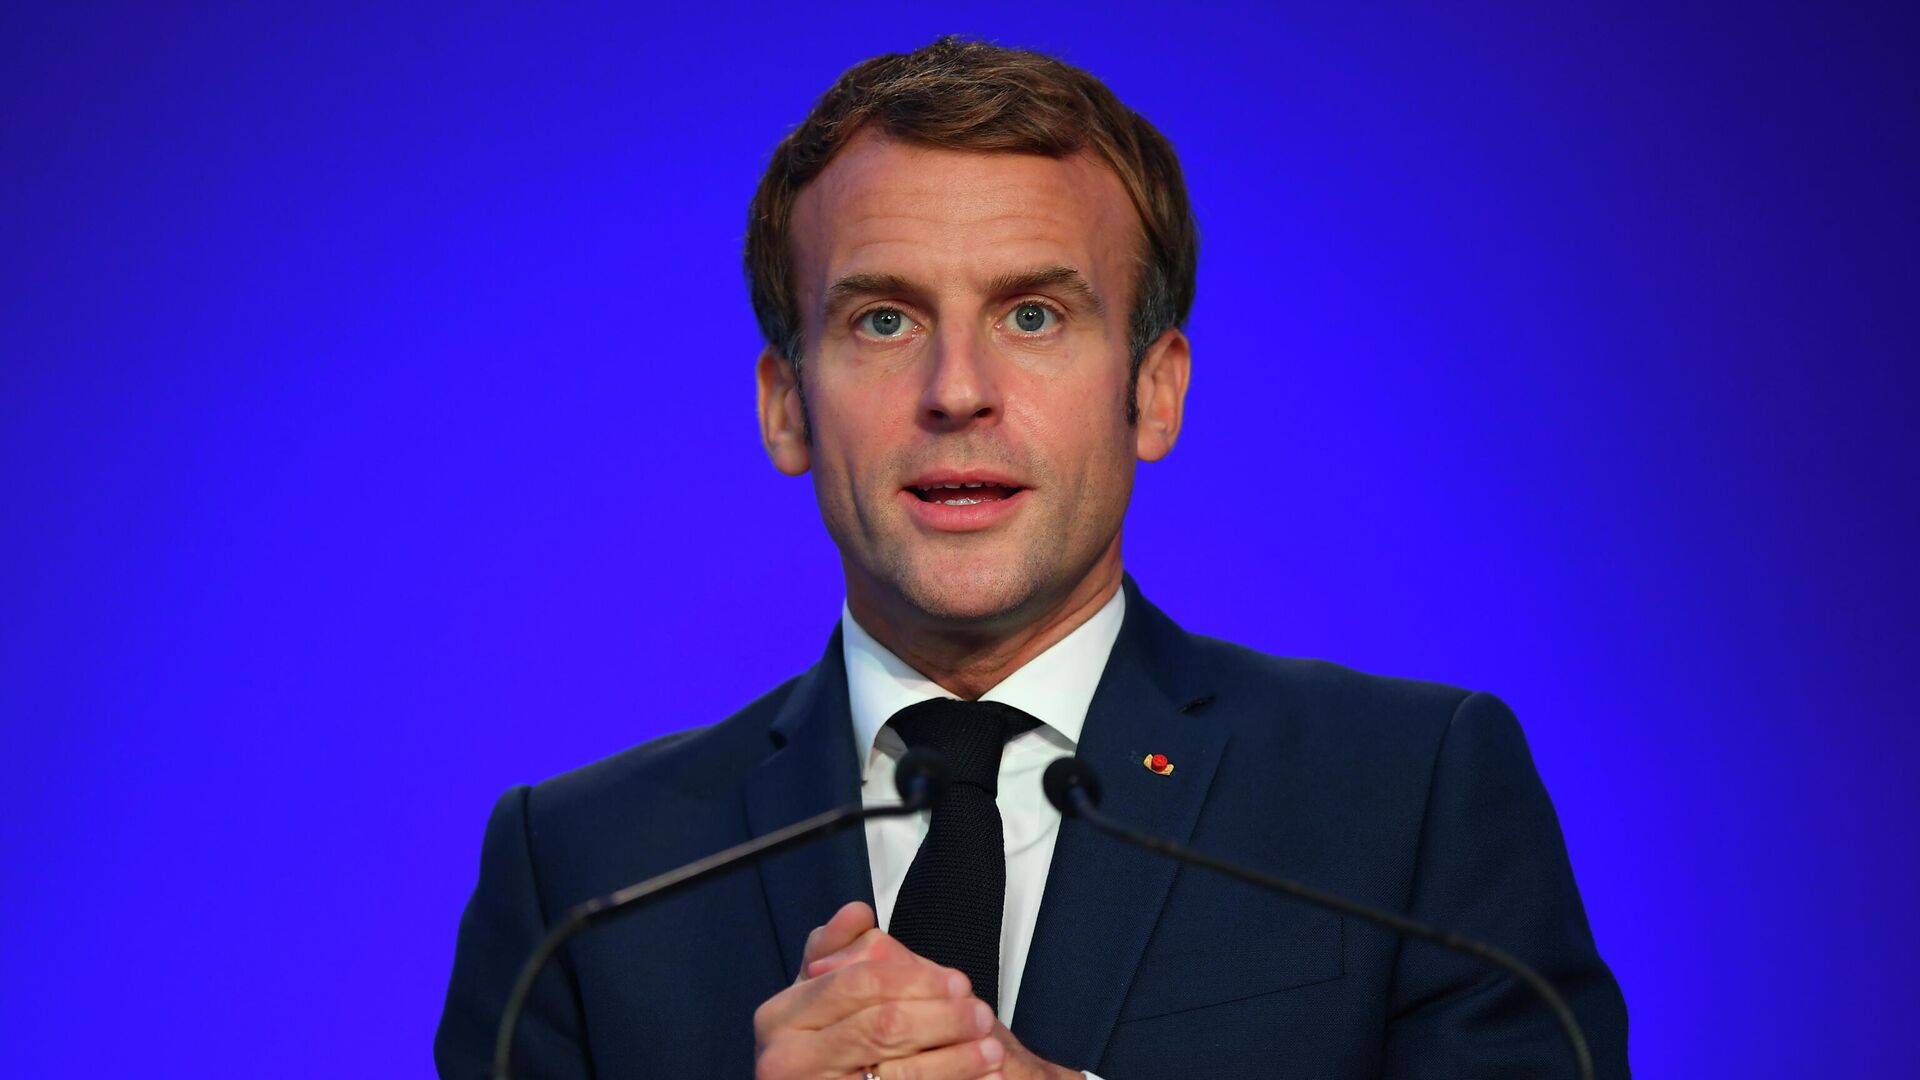 France's President Emmanuel Macron presents his national statement as a part of the World Leaders' Summit at the UN Climate Change Conference (COP26) in Glasgow, Scotland, Britain November 1, 2021 - Sputnik International, 1920, 12.11.2021